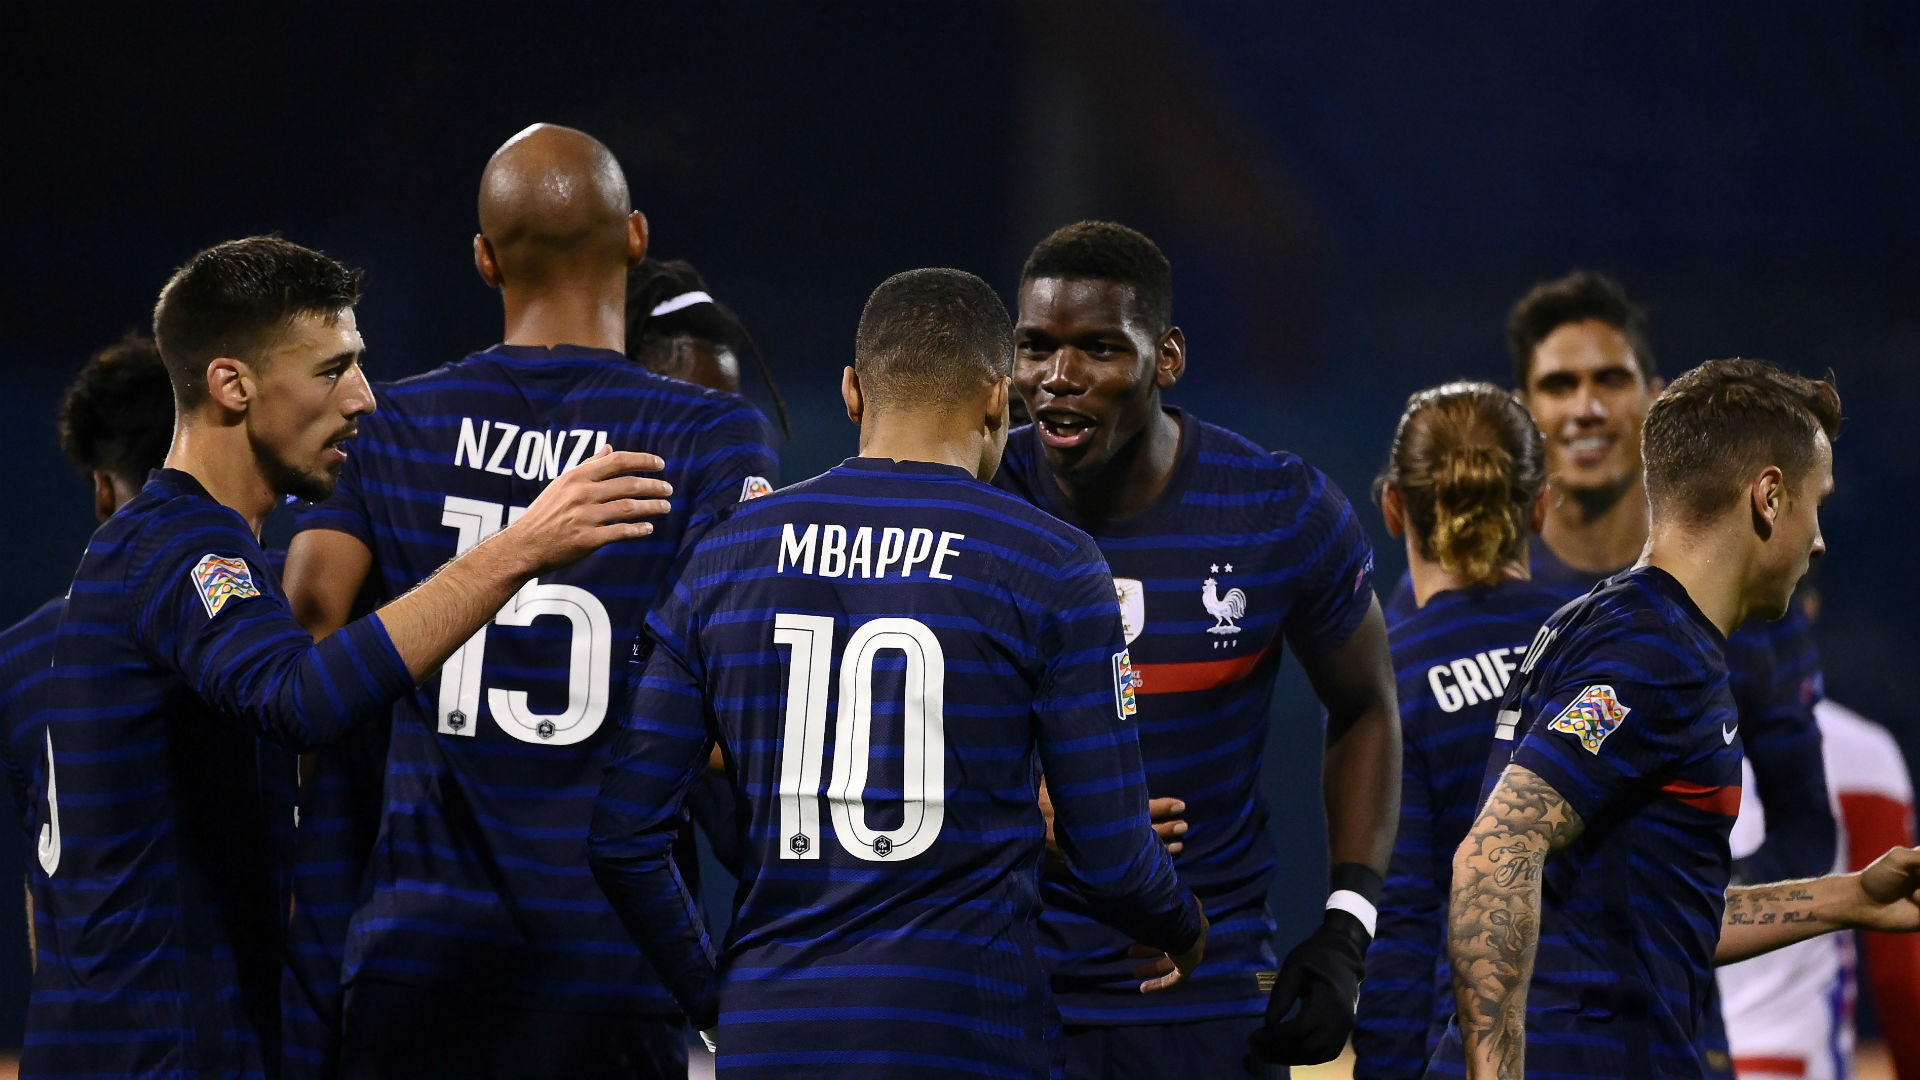 Croatia 1-2 France: Mbappe late show snatches Nations League win